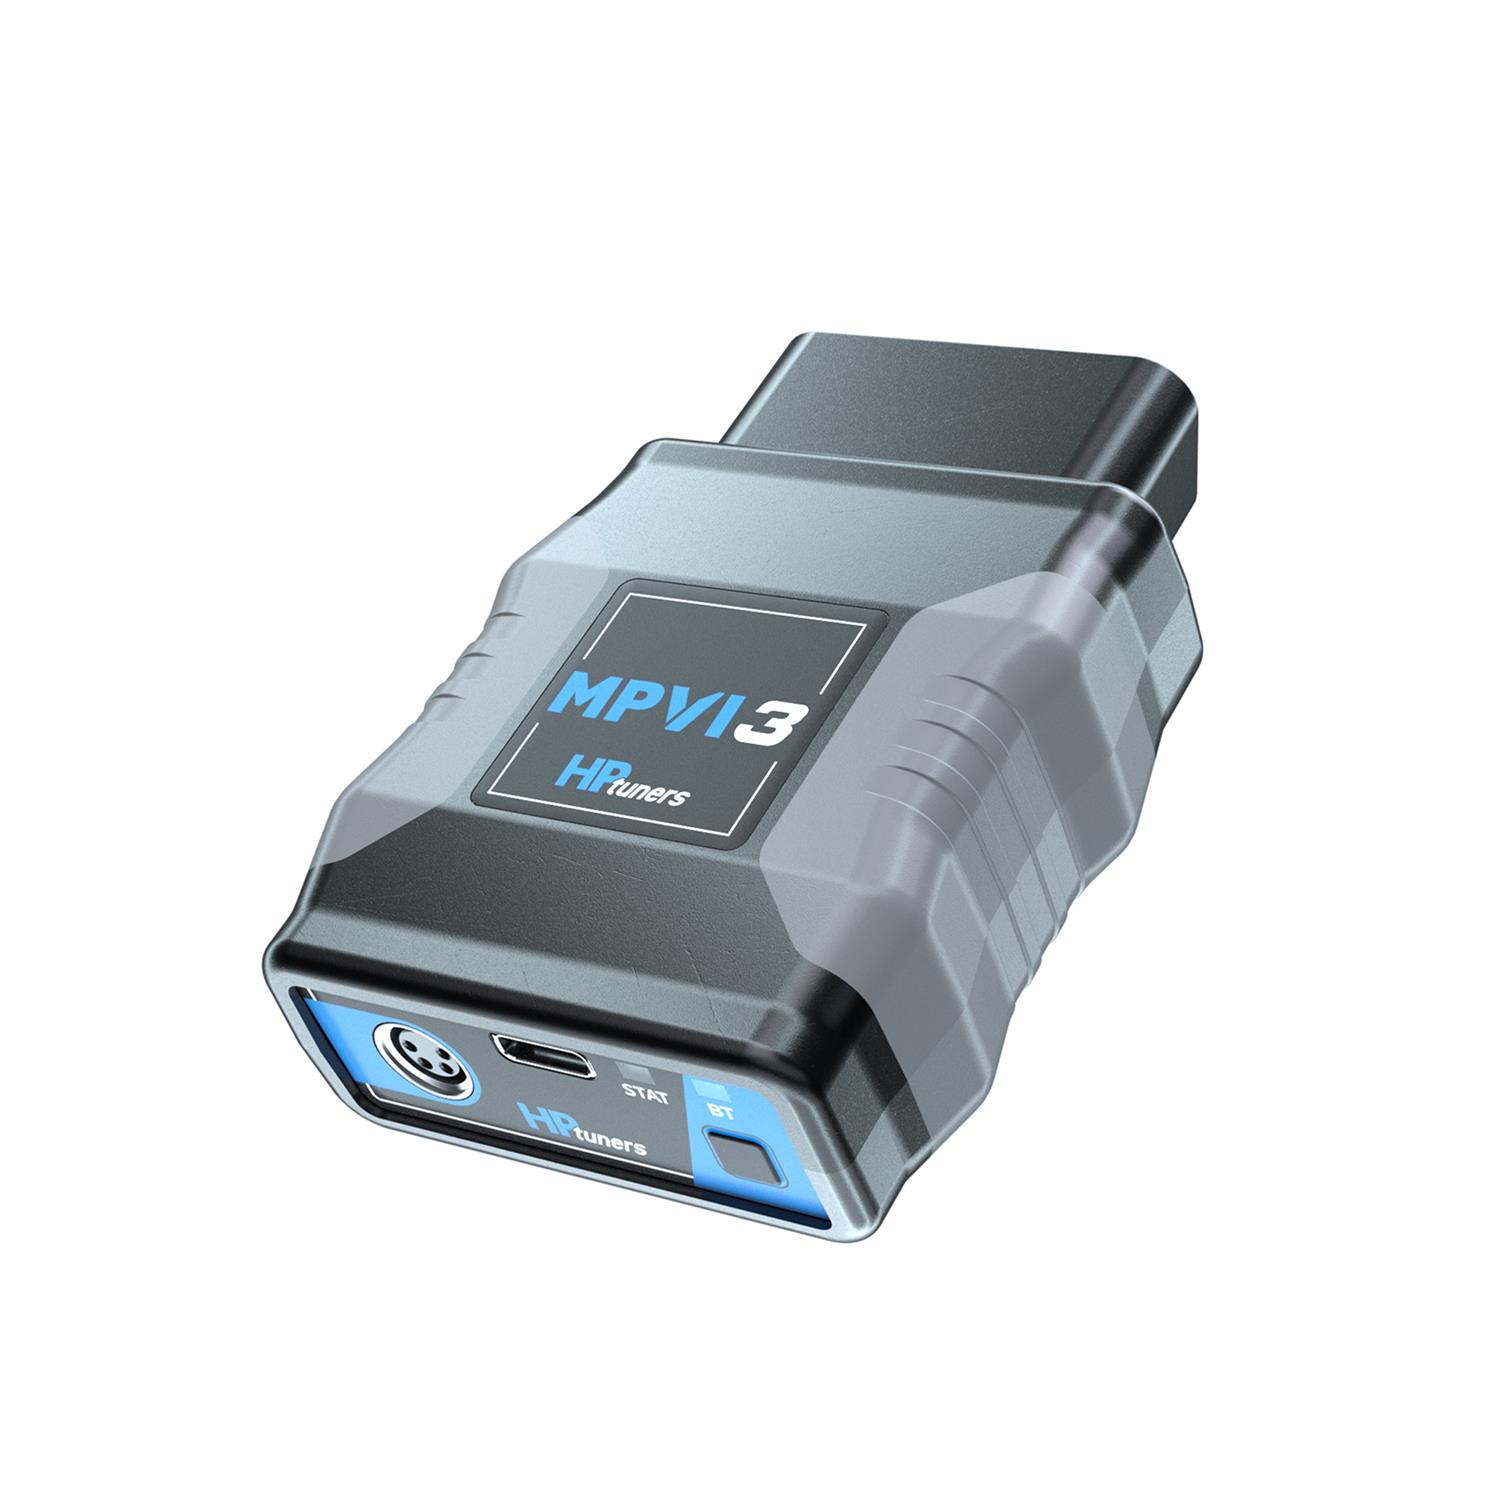 HP Tuners VCM Suite MPVI3 Credit Pro Packages M03-000-04, The latest generation of hardware from HP Tuners